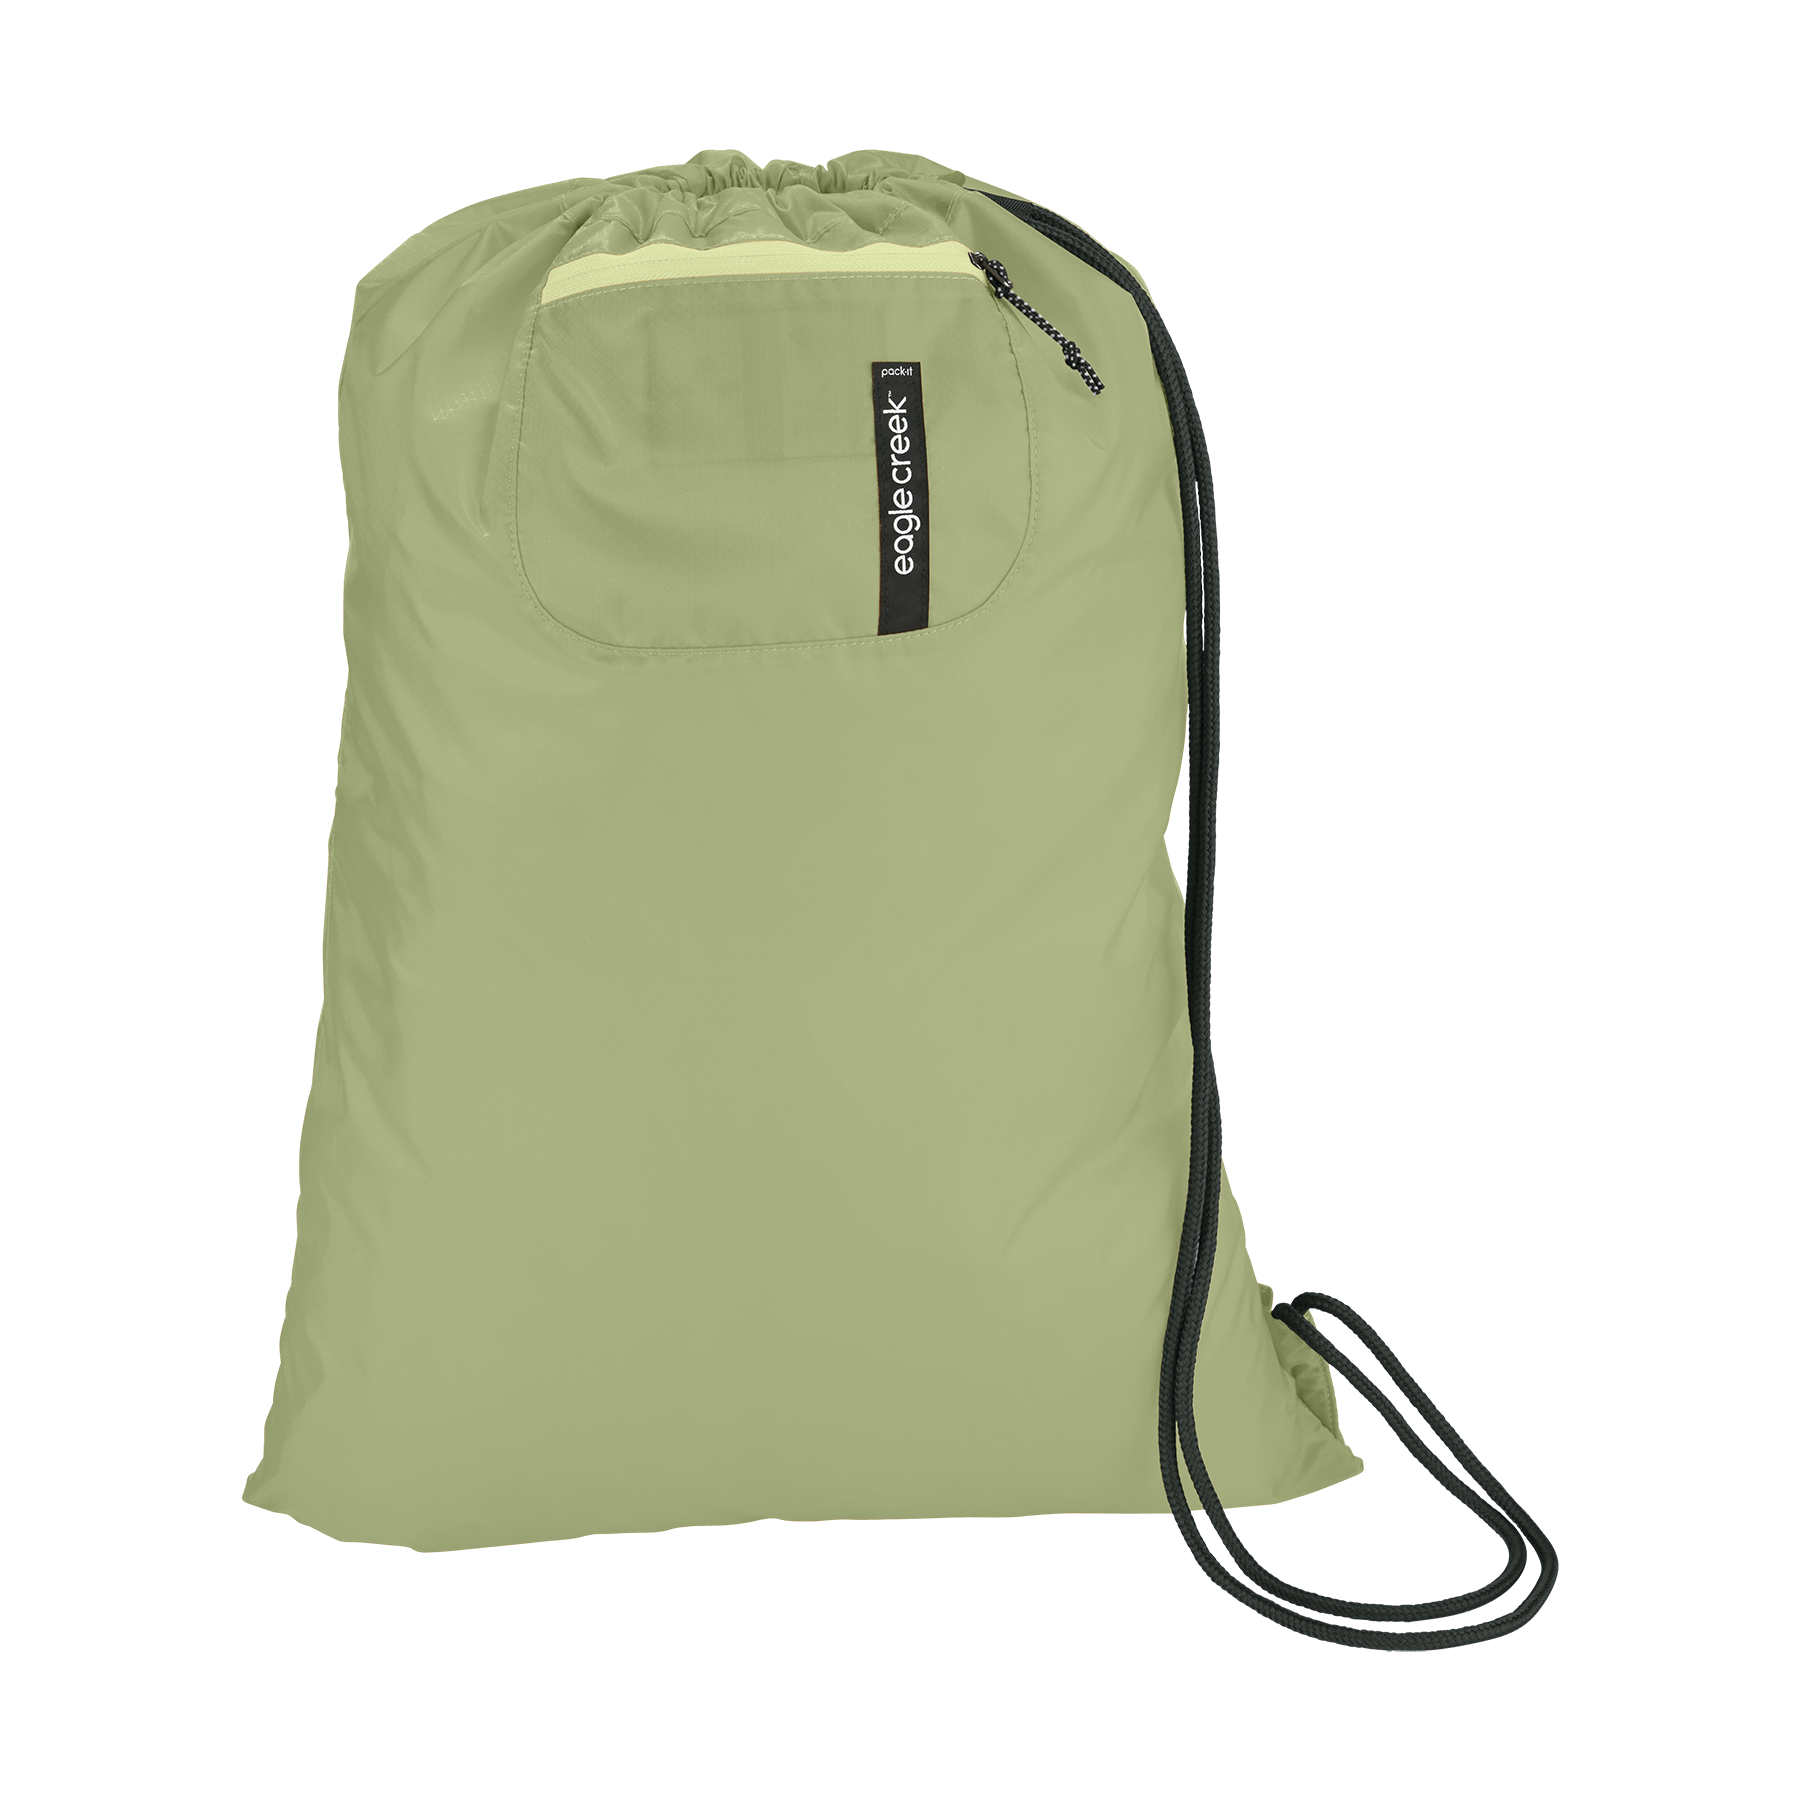 Eagle Creek PACK-IT Isolate Laundry Sac - Mossy Green